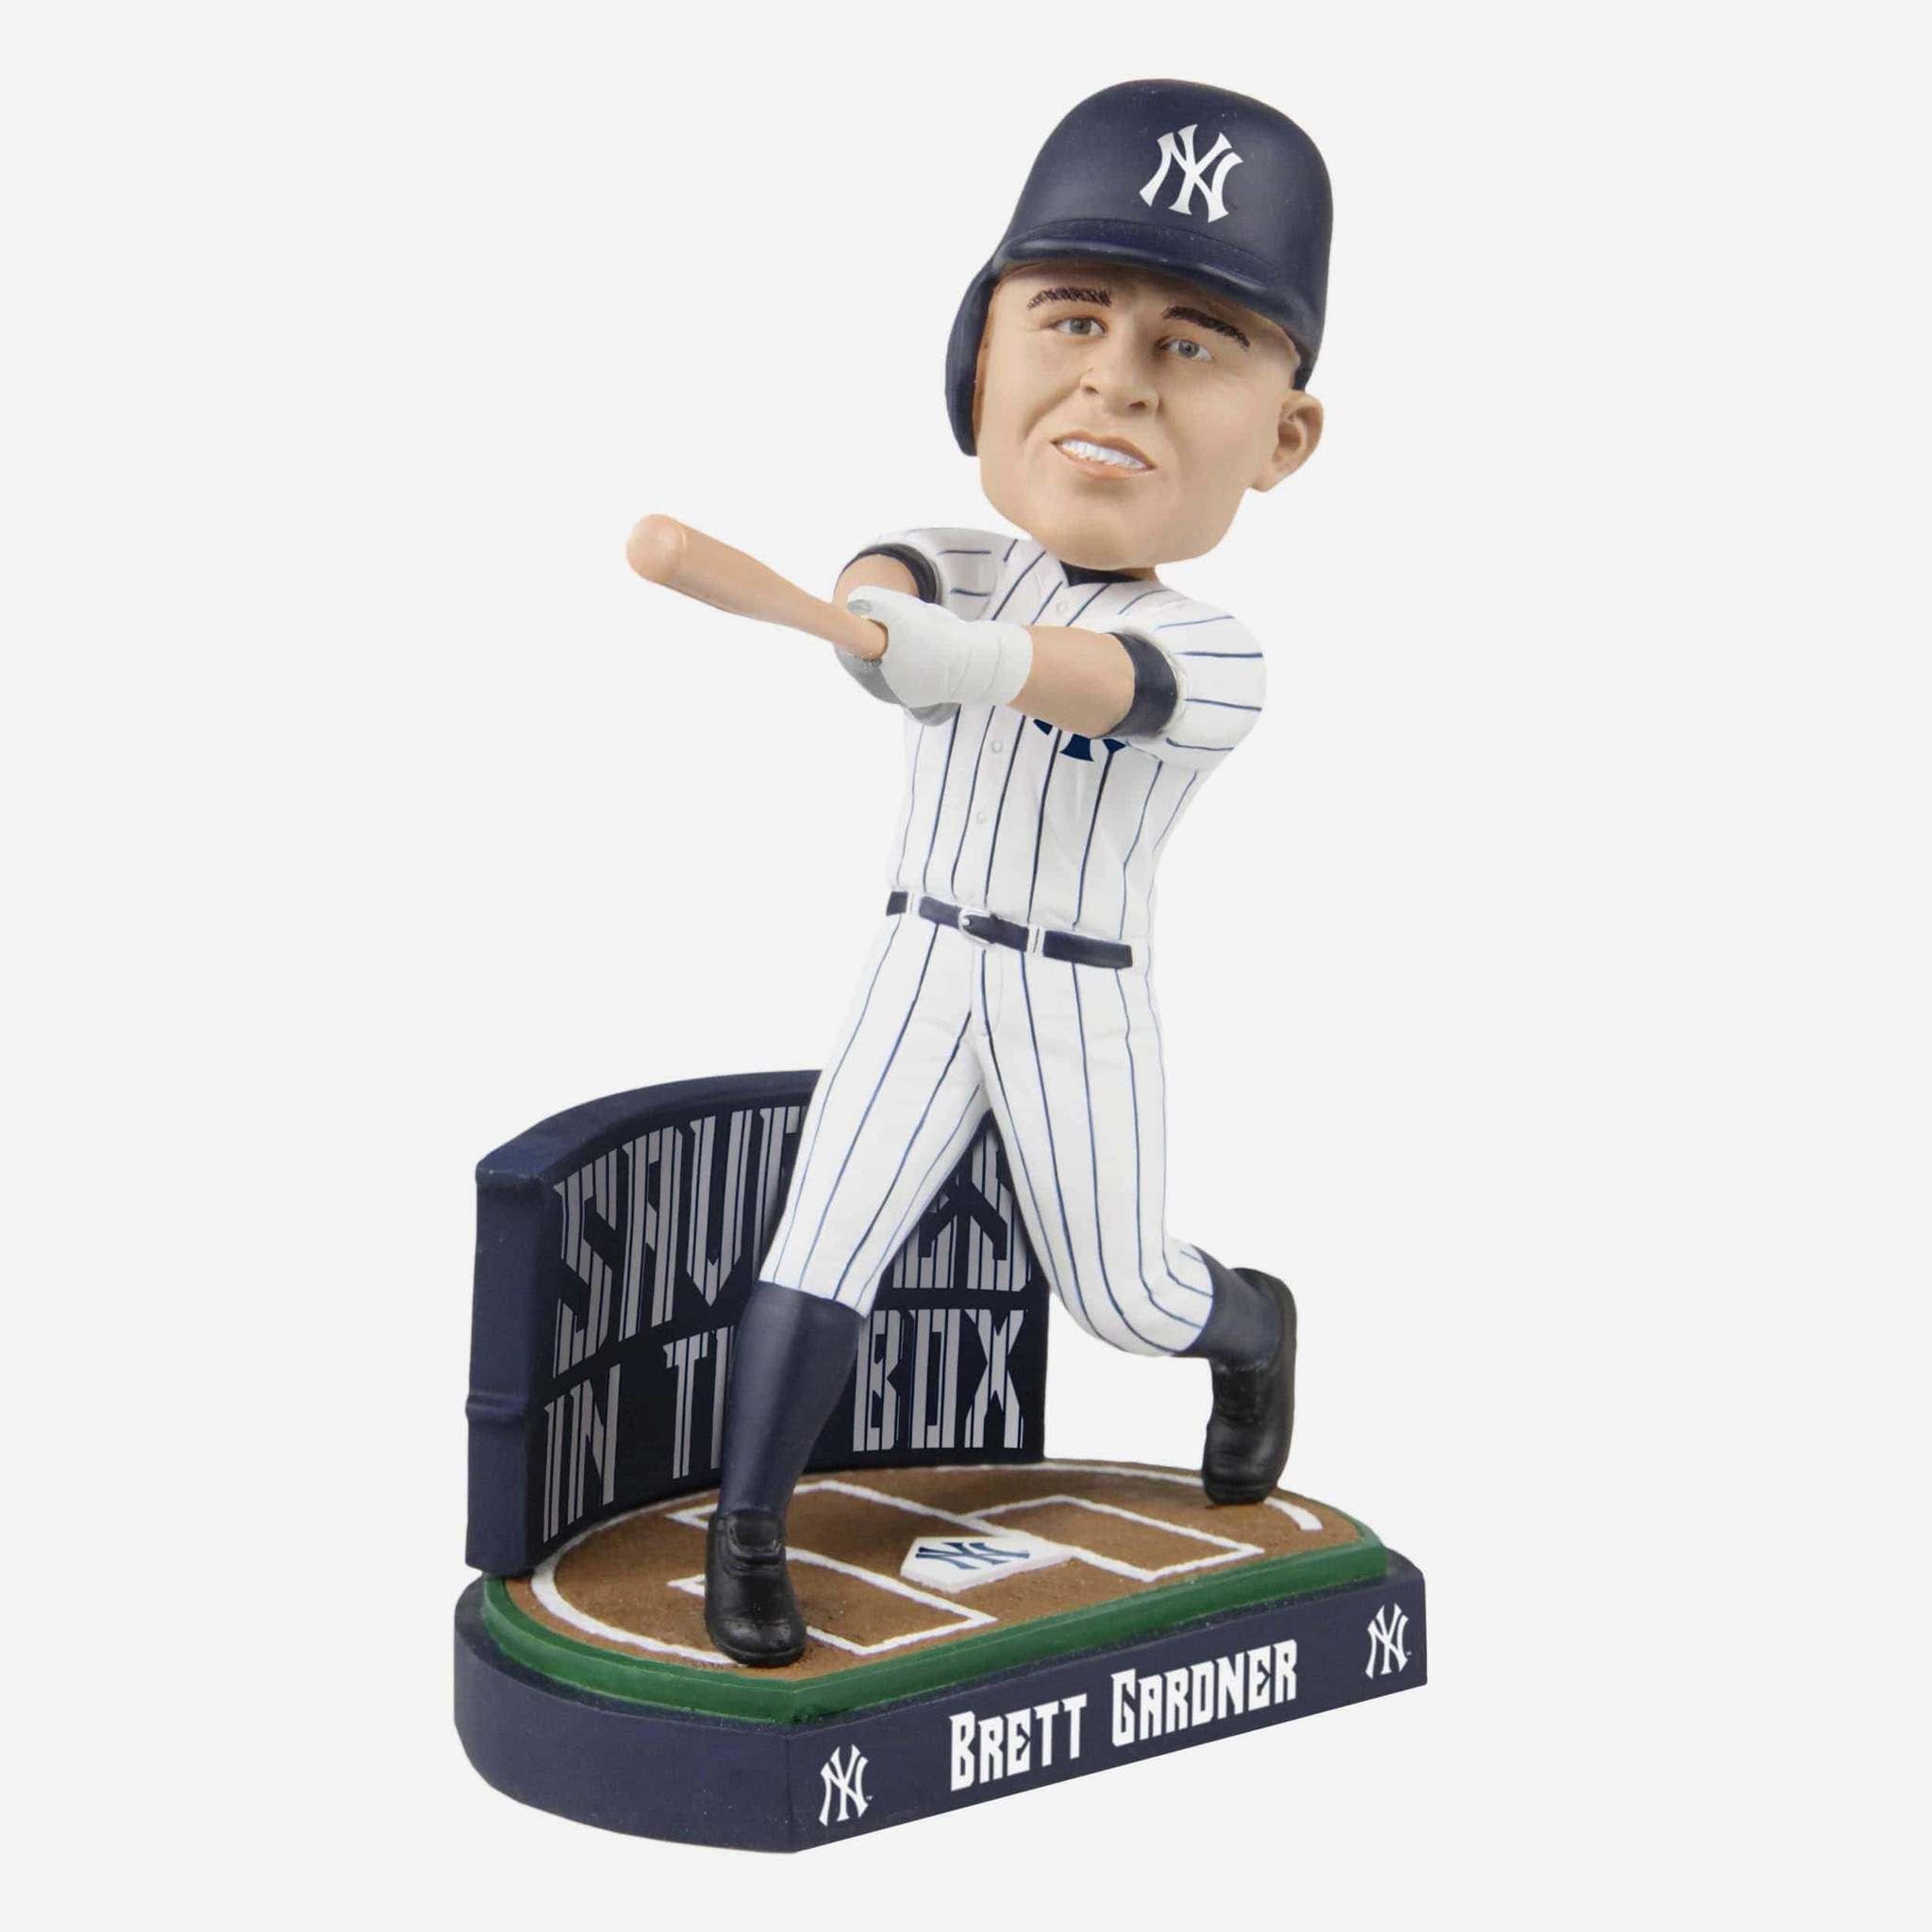 New York Yankees fans need these ‘Savages’ bobbleheads